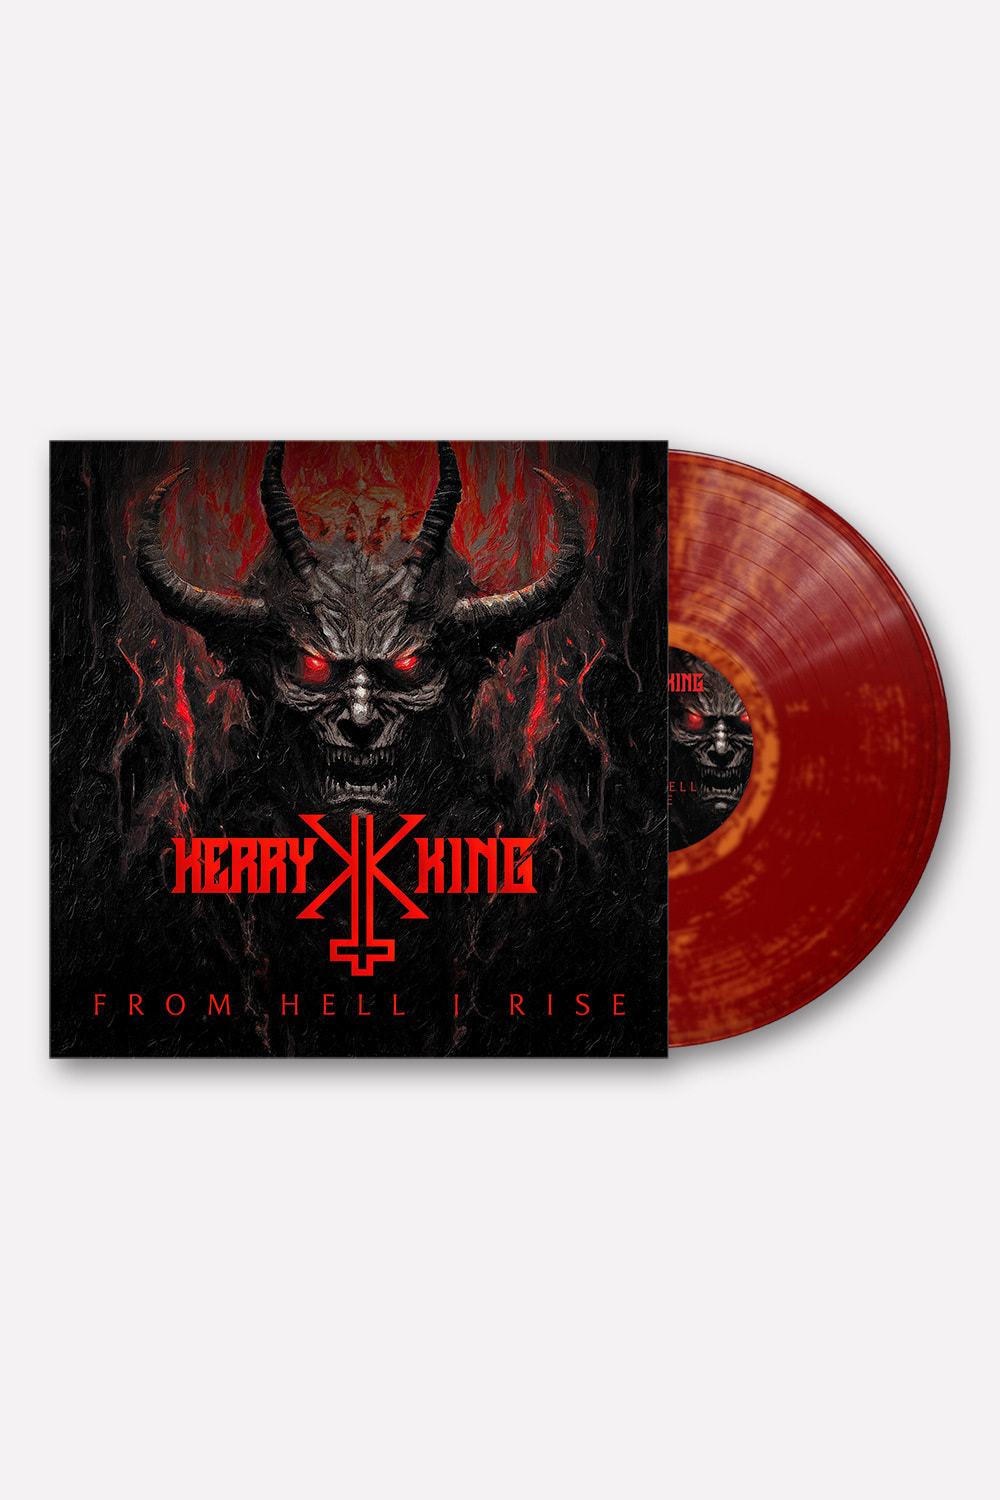 Kerry King - From Hell I Rise. DARK RED/ORANGE MARBLED VINYL 